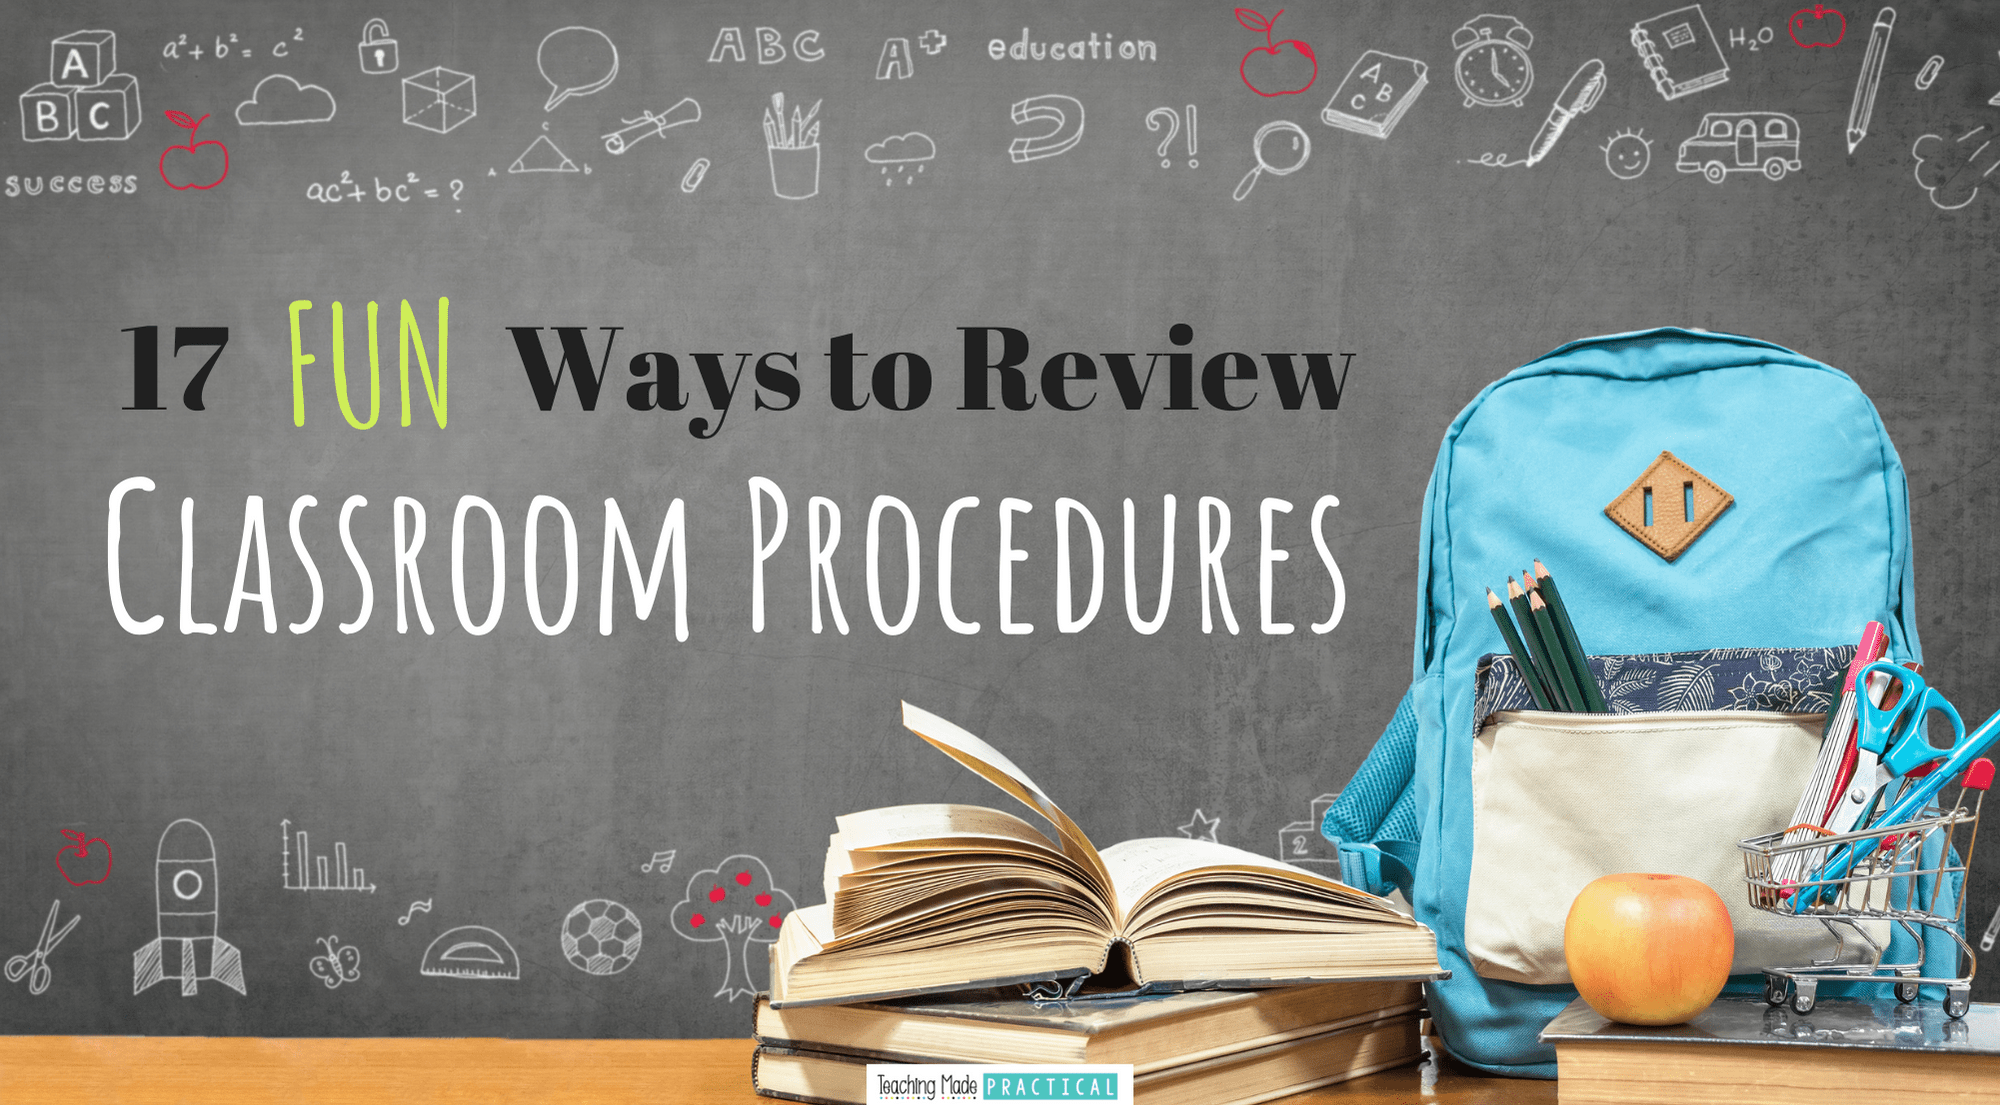 Includes a free printable!  Practicing procedures over and over again at the beginning of the school year can get a little boring.  Here are 17 different ways to review classroom procedures with your 3rd grade, 4th grade, or 5th grade class!